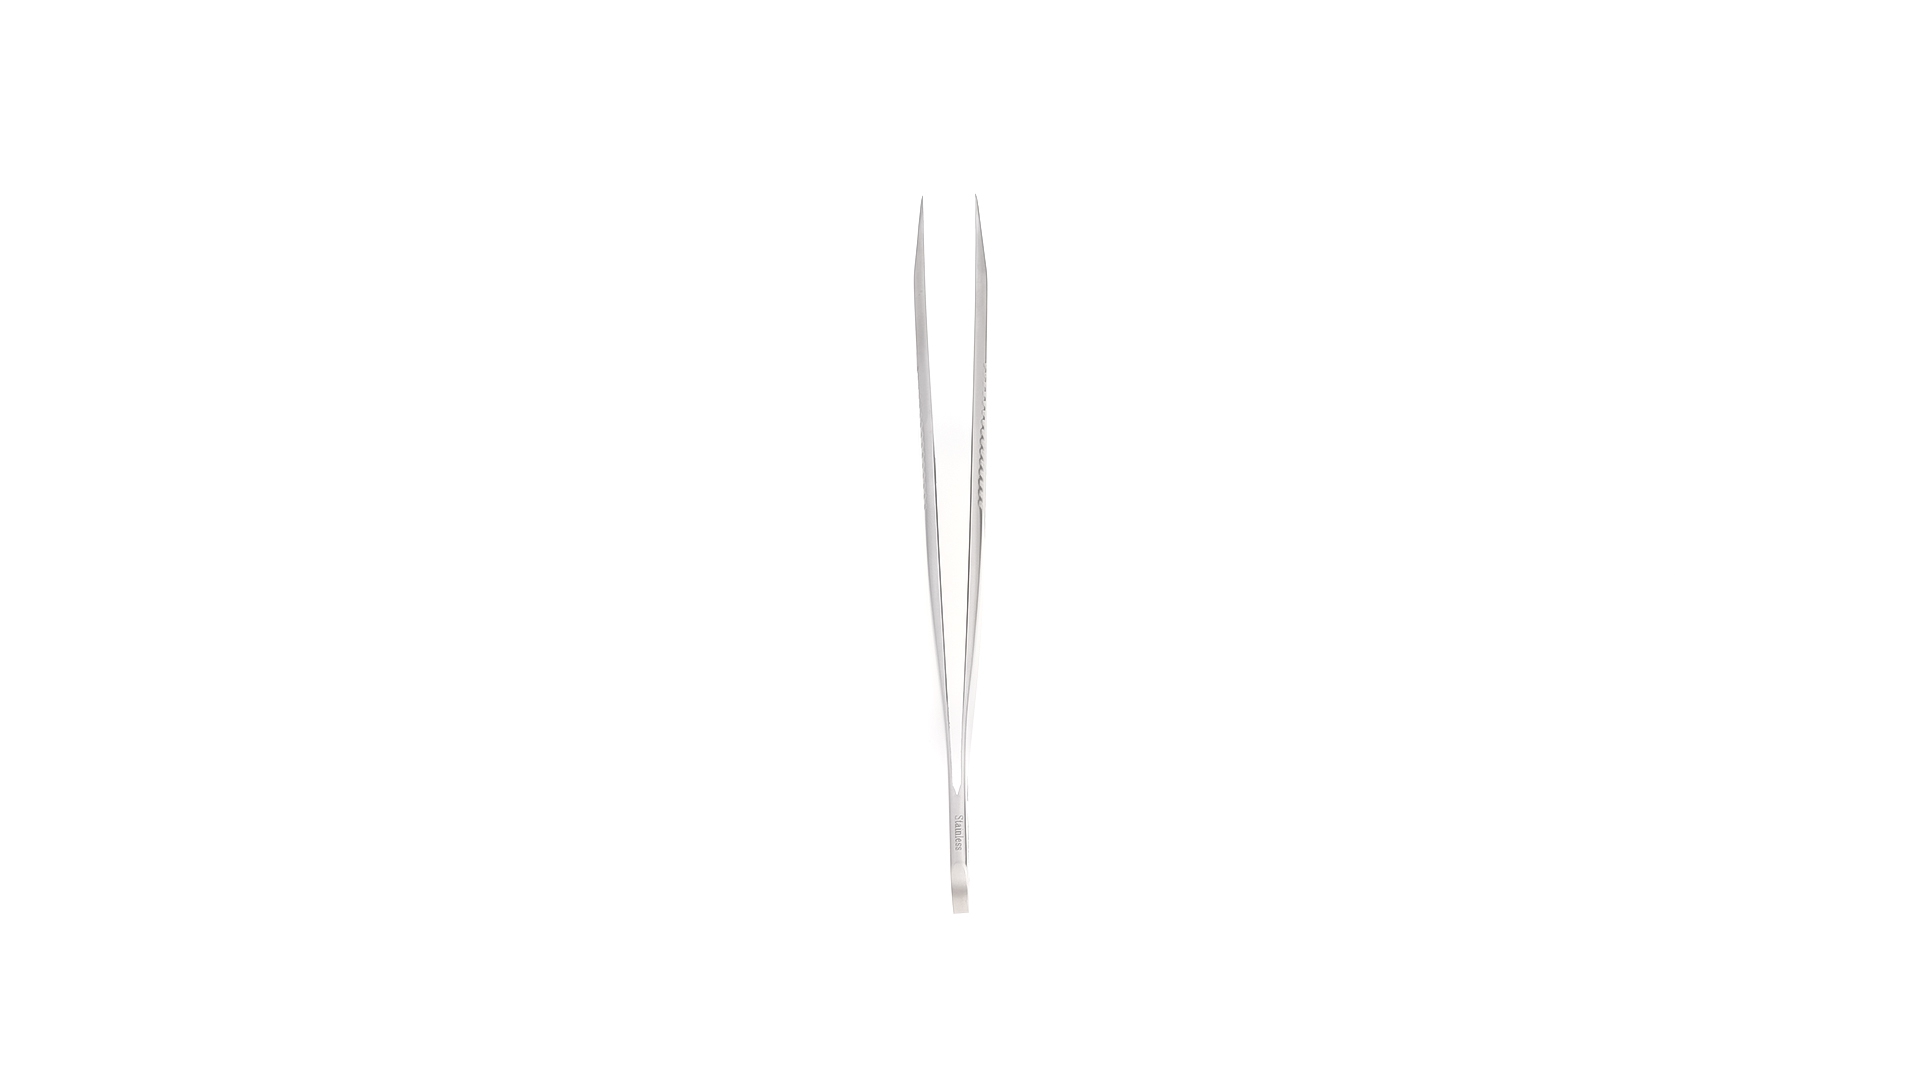 Jeweler Style Forceps #3 - Curved 0.3mm TC coated tips